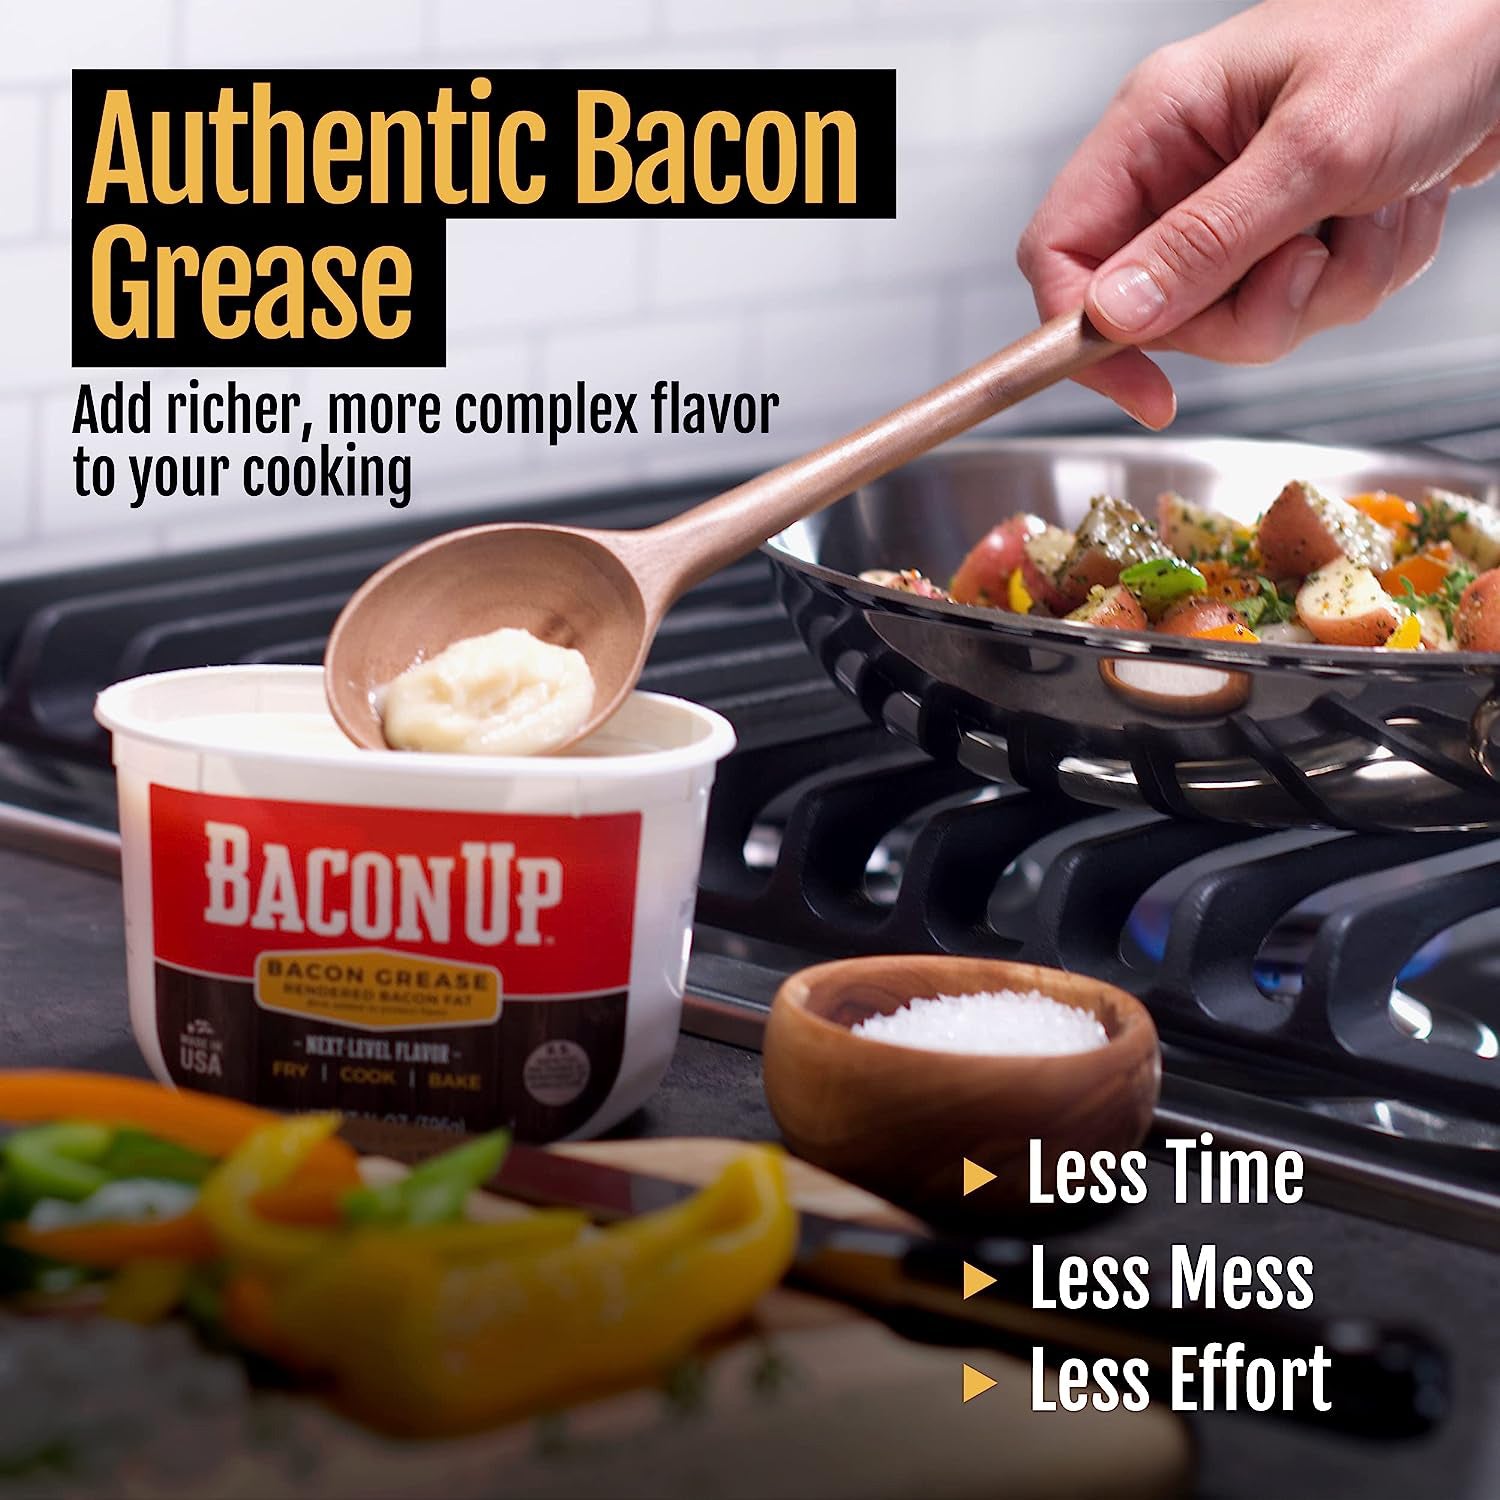 Bacon Up Rendered Cooking Bacon Grease 14oz